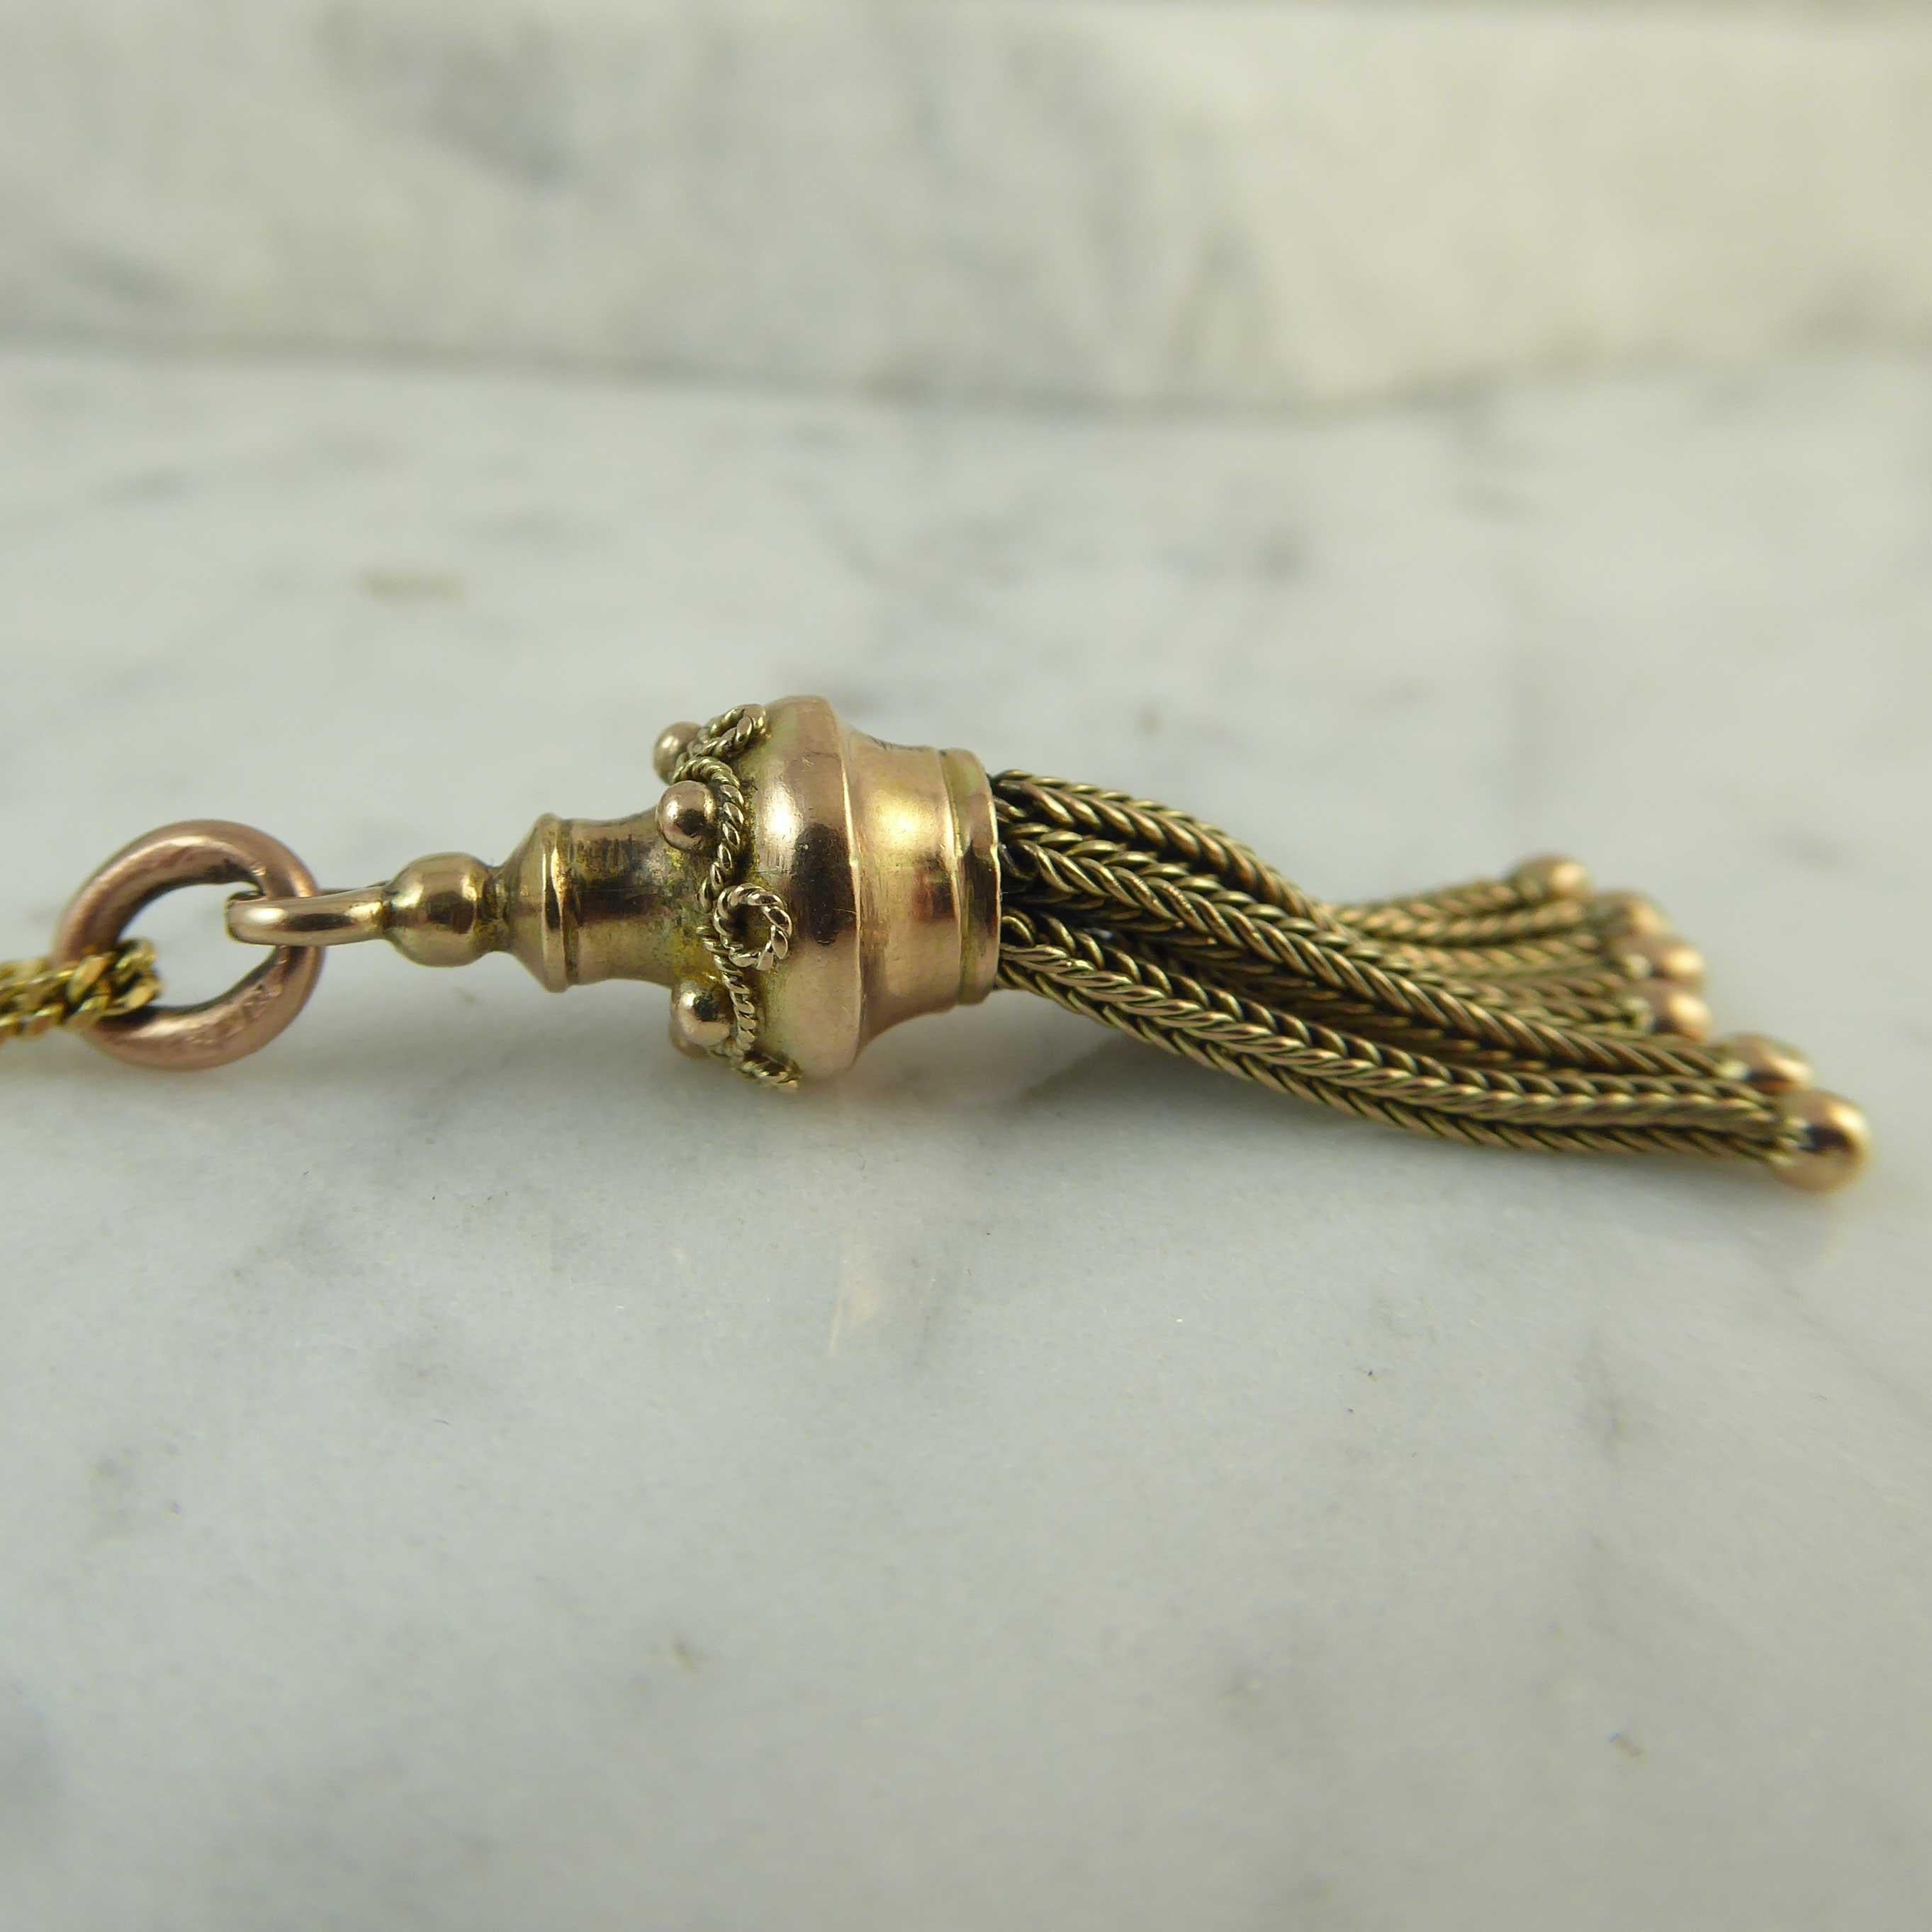 Late Victorian yellow gold tassel pendant suspending from a yellow gold chain 22